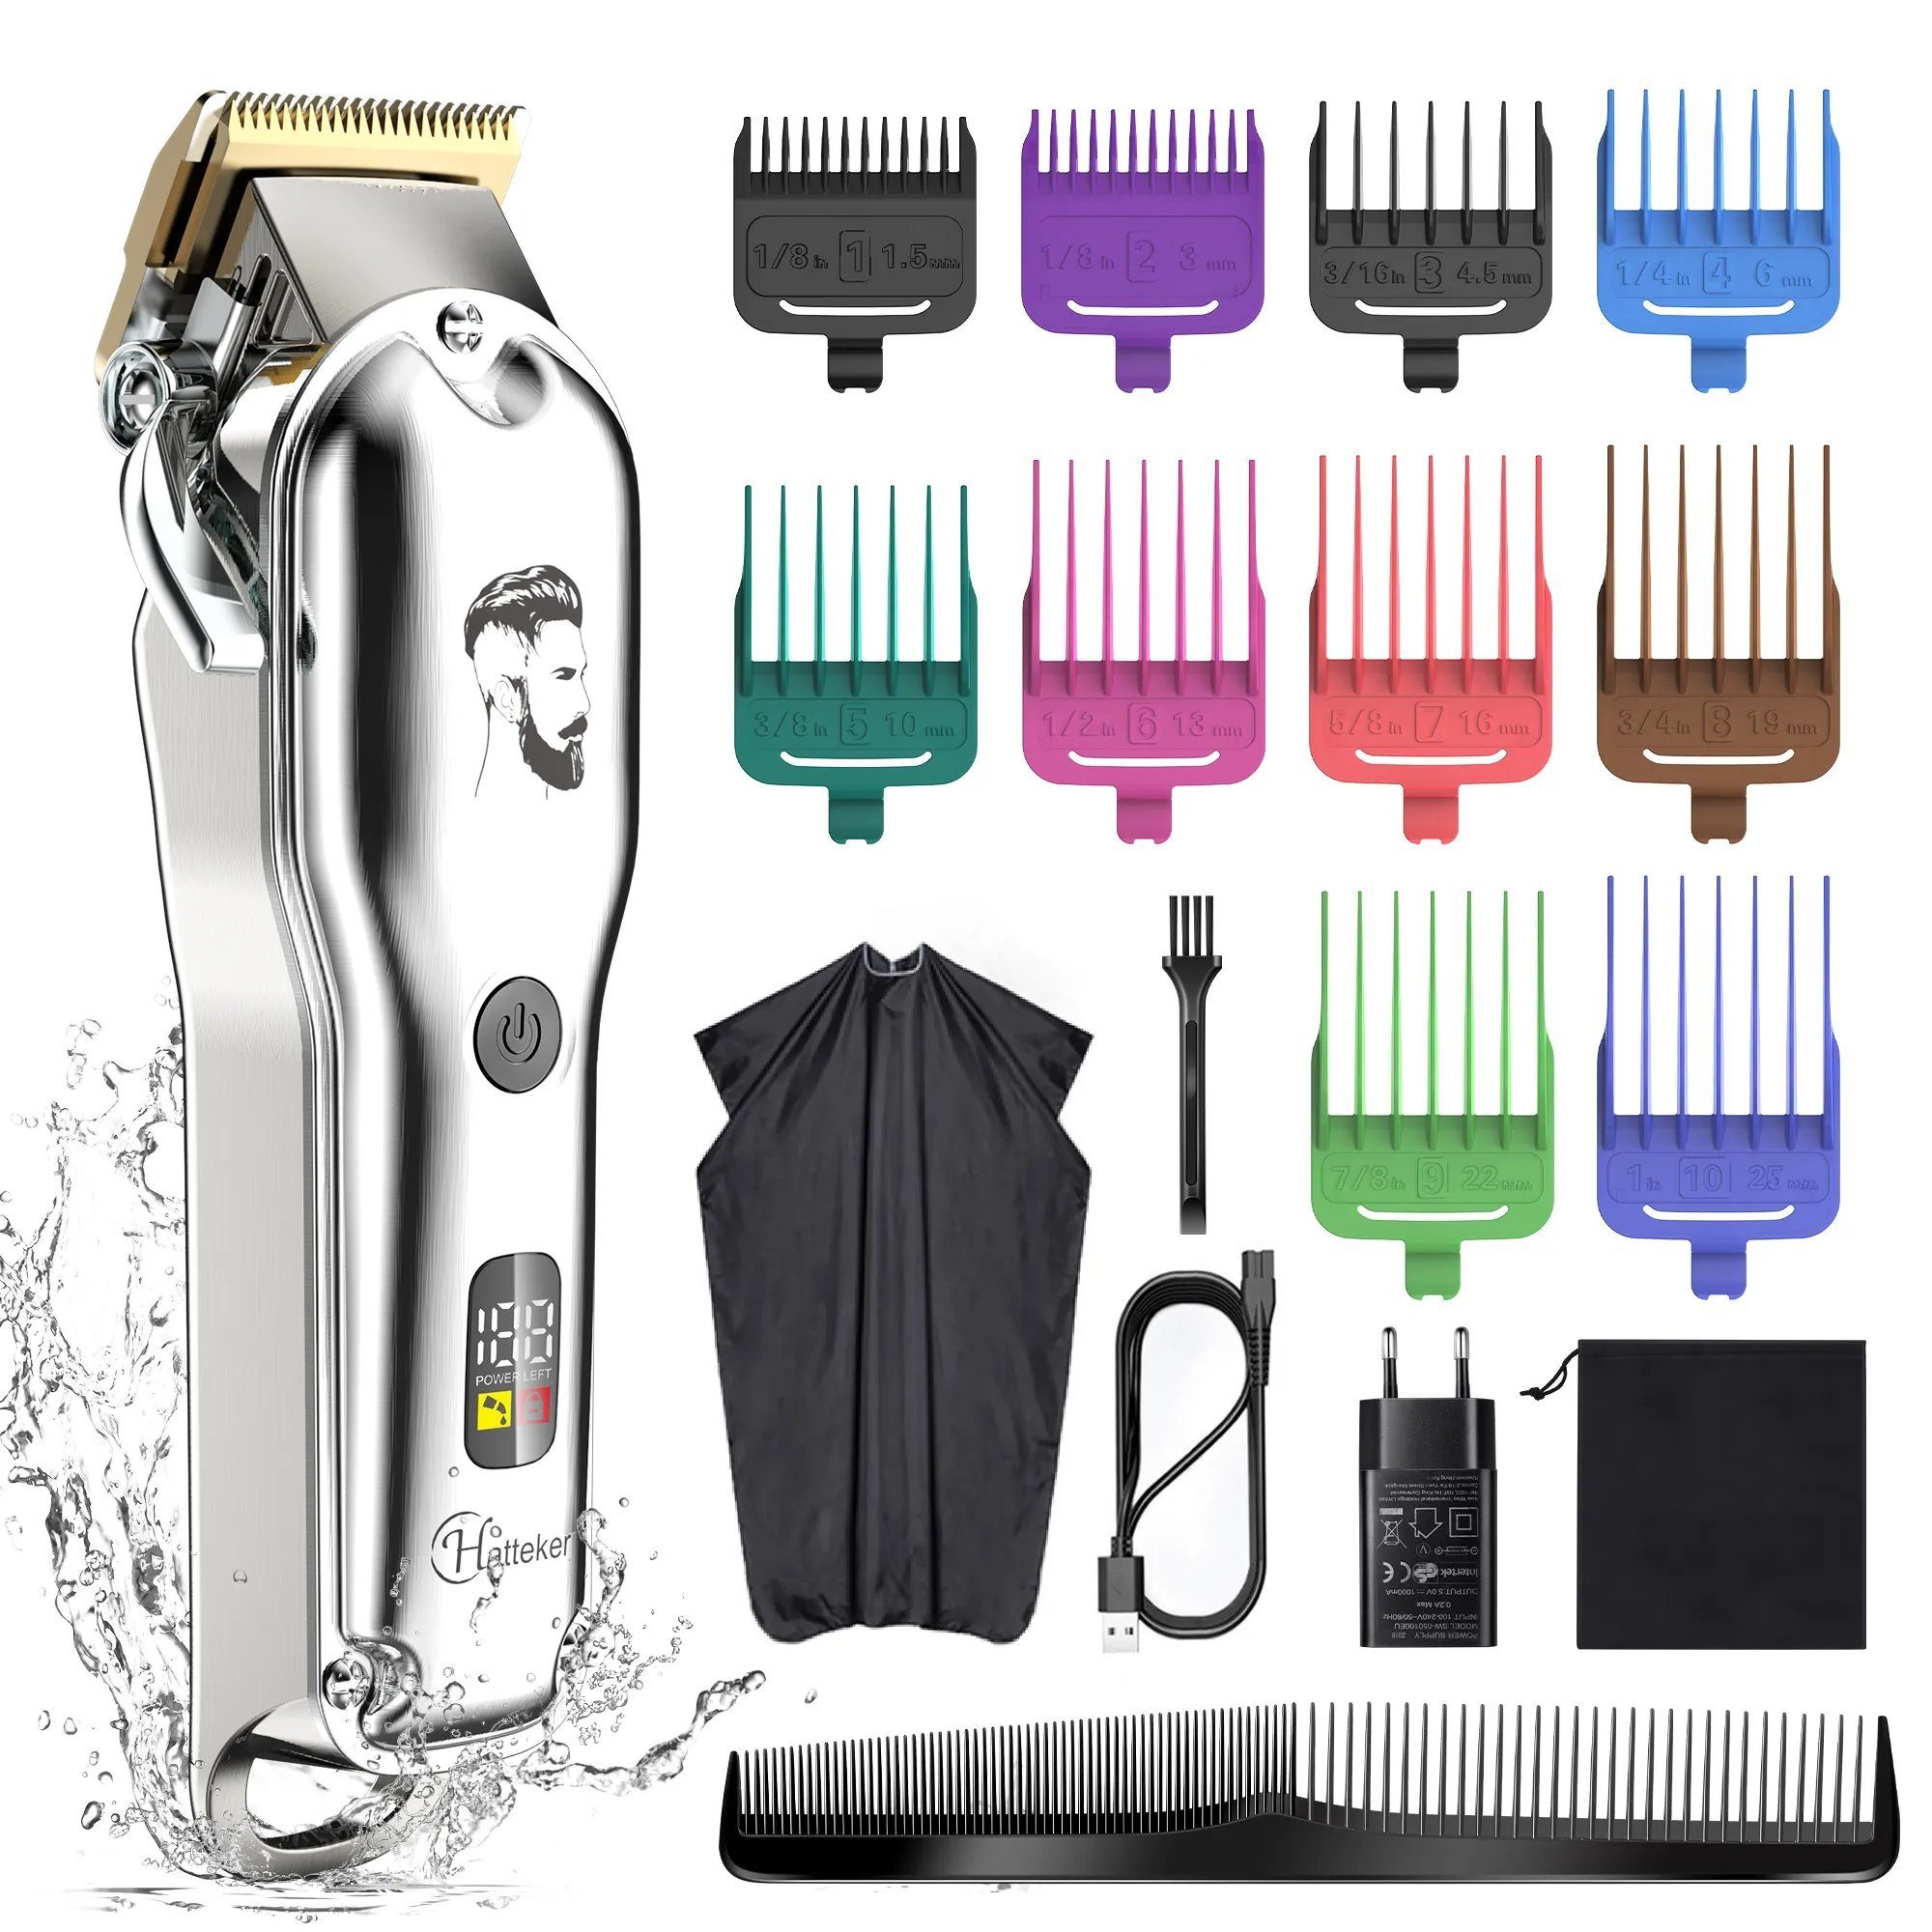 HATTEKER Beauty-Trimmer Professional Barbers Grooming Vollständig Rechargeable, Combs 2000 Hair mAh, Clippers, Colorful Kit waschbar